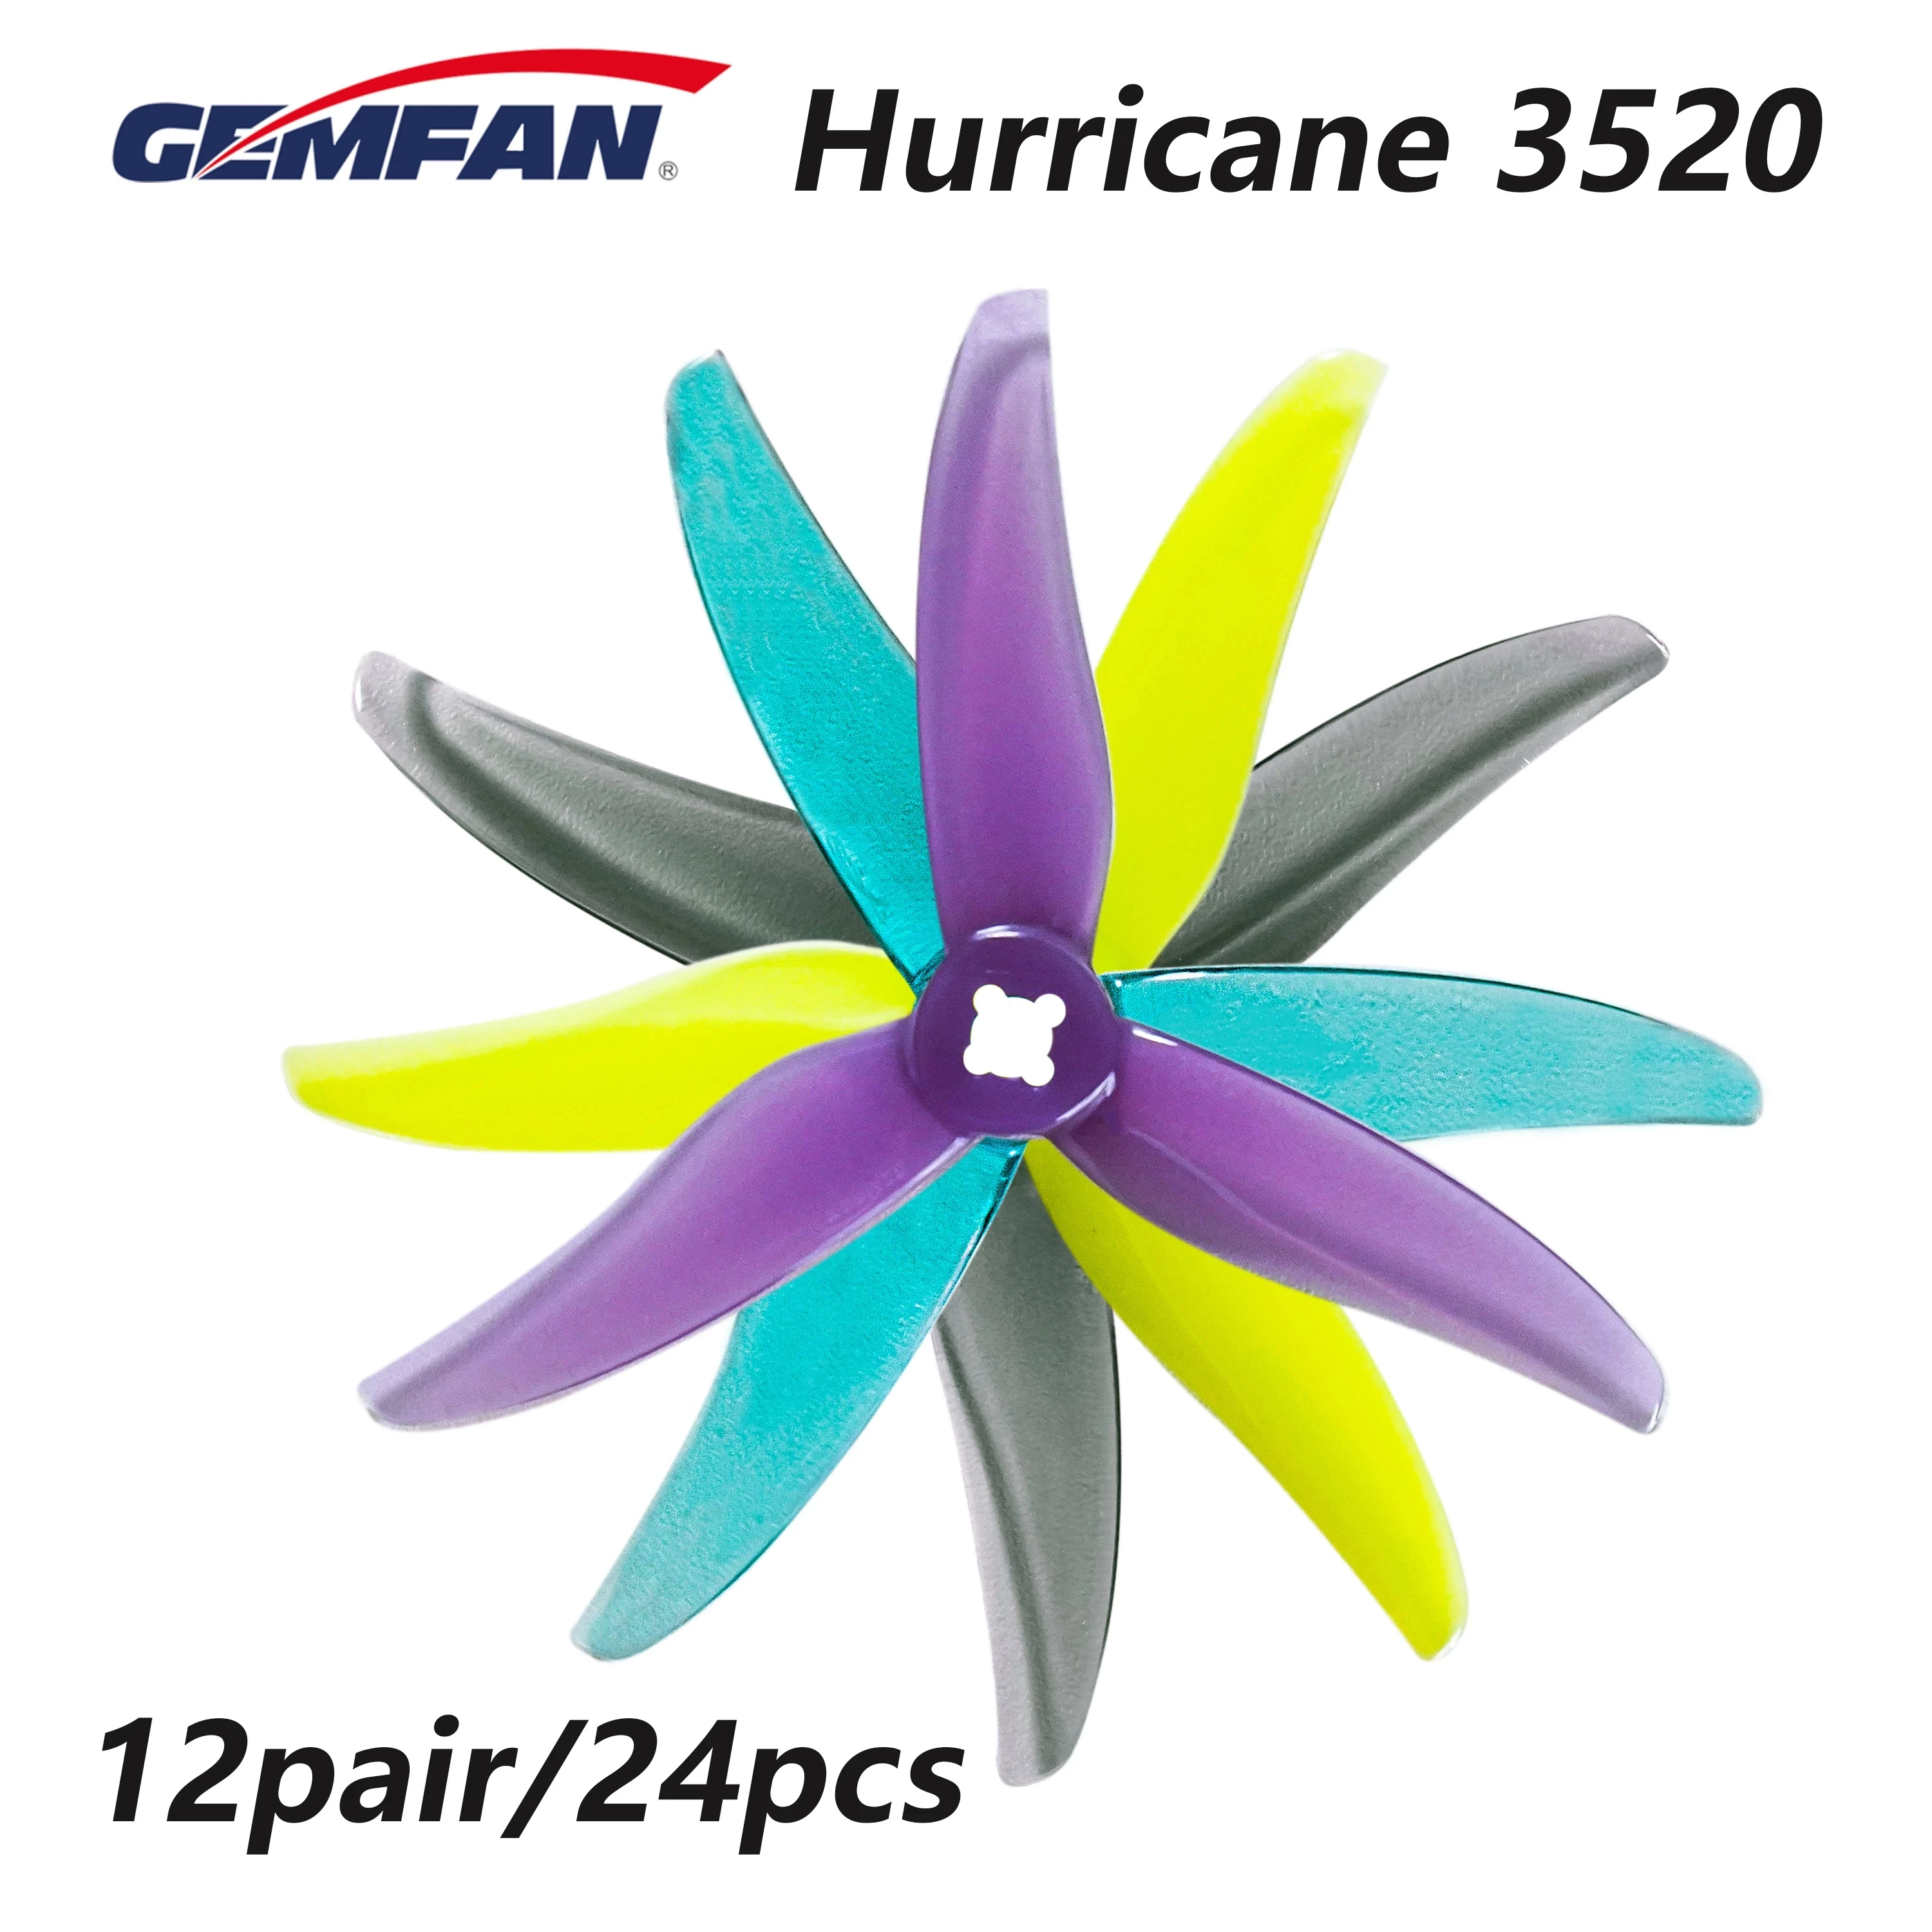 

24pcs/12pairs Gemfan Hurricane 3520 3.5X2X3 3-Blade PC Propeller for FPV Racing Freestyle 3inch Cinewhoop Ducted Drones